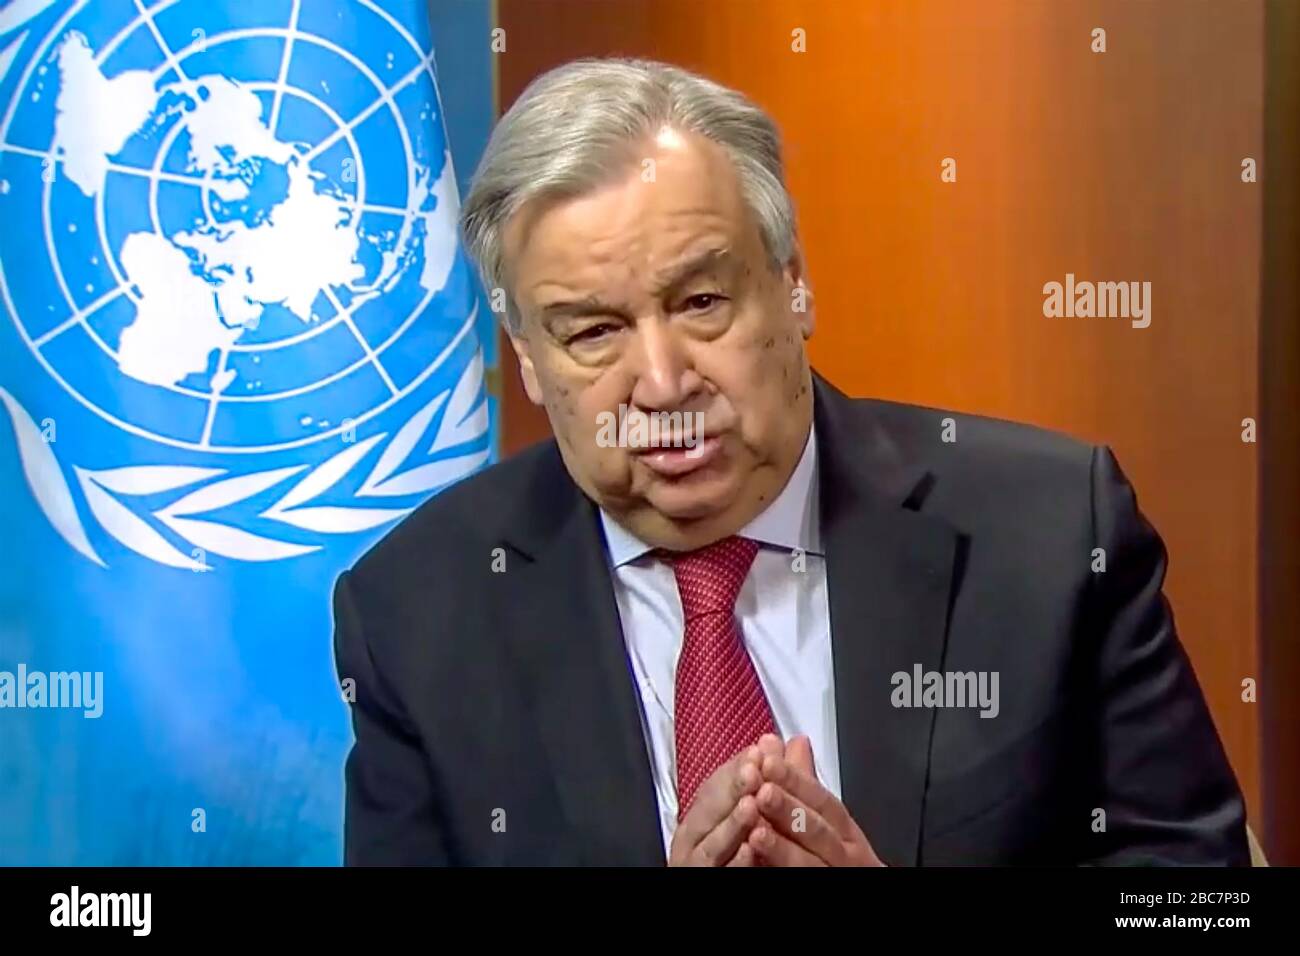 New York, USA. 3rd Apr, 2020. United Nations Secretary-General António Guterres reiterated his plea for an immediate global ceasefire to fight COVID-19 during a virtual press conference from the UN headquarters in New York City. ATTENTION EDITORS: this is a video screen grab from UN web TV. Credit: Enrique Shore/Alamy Live News Stock Photo